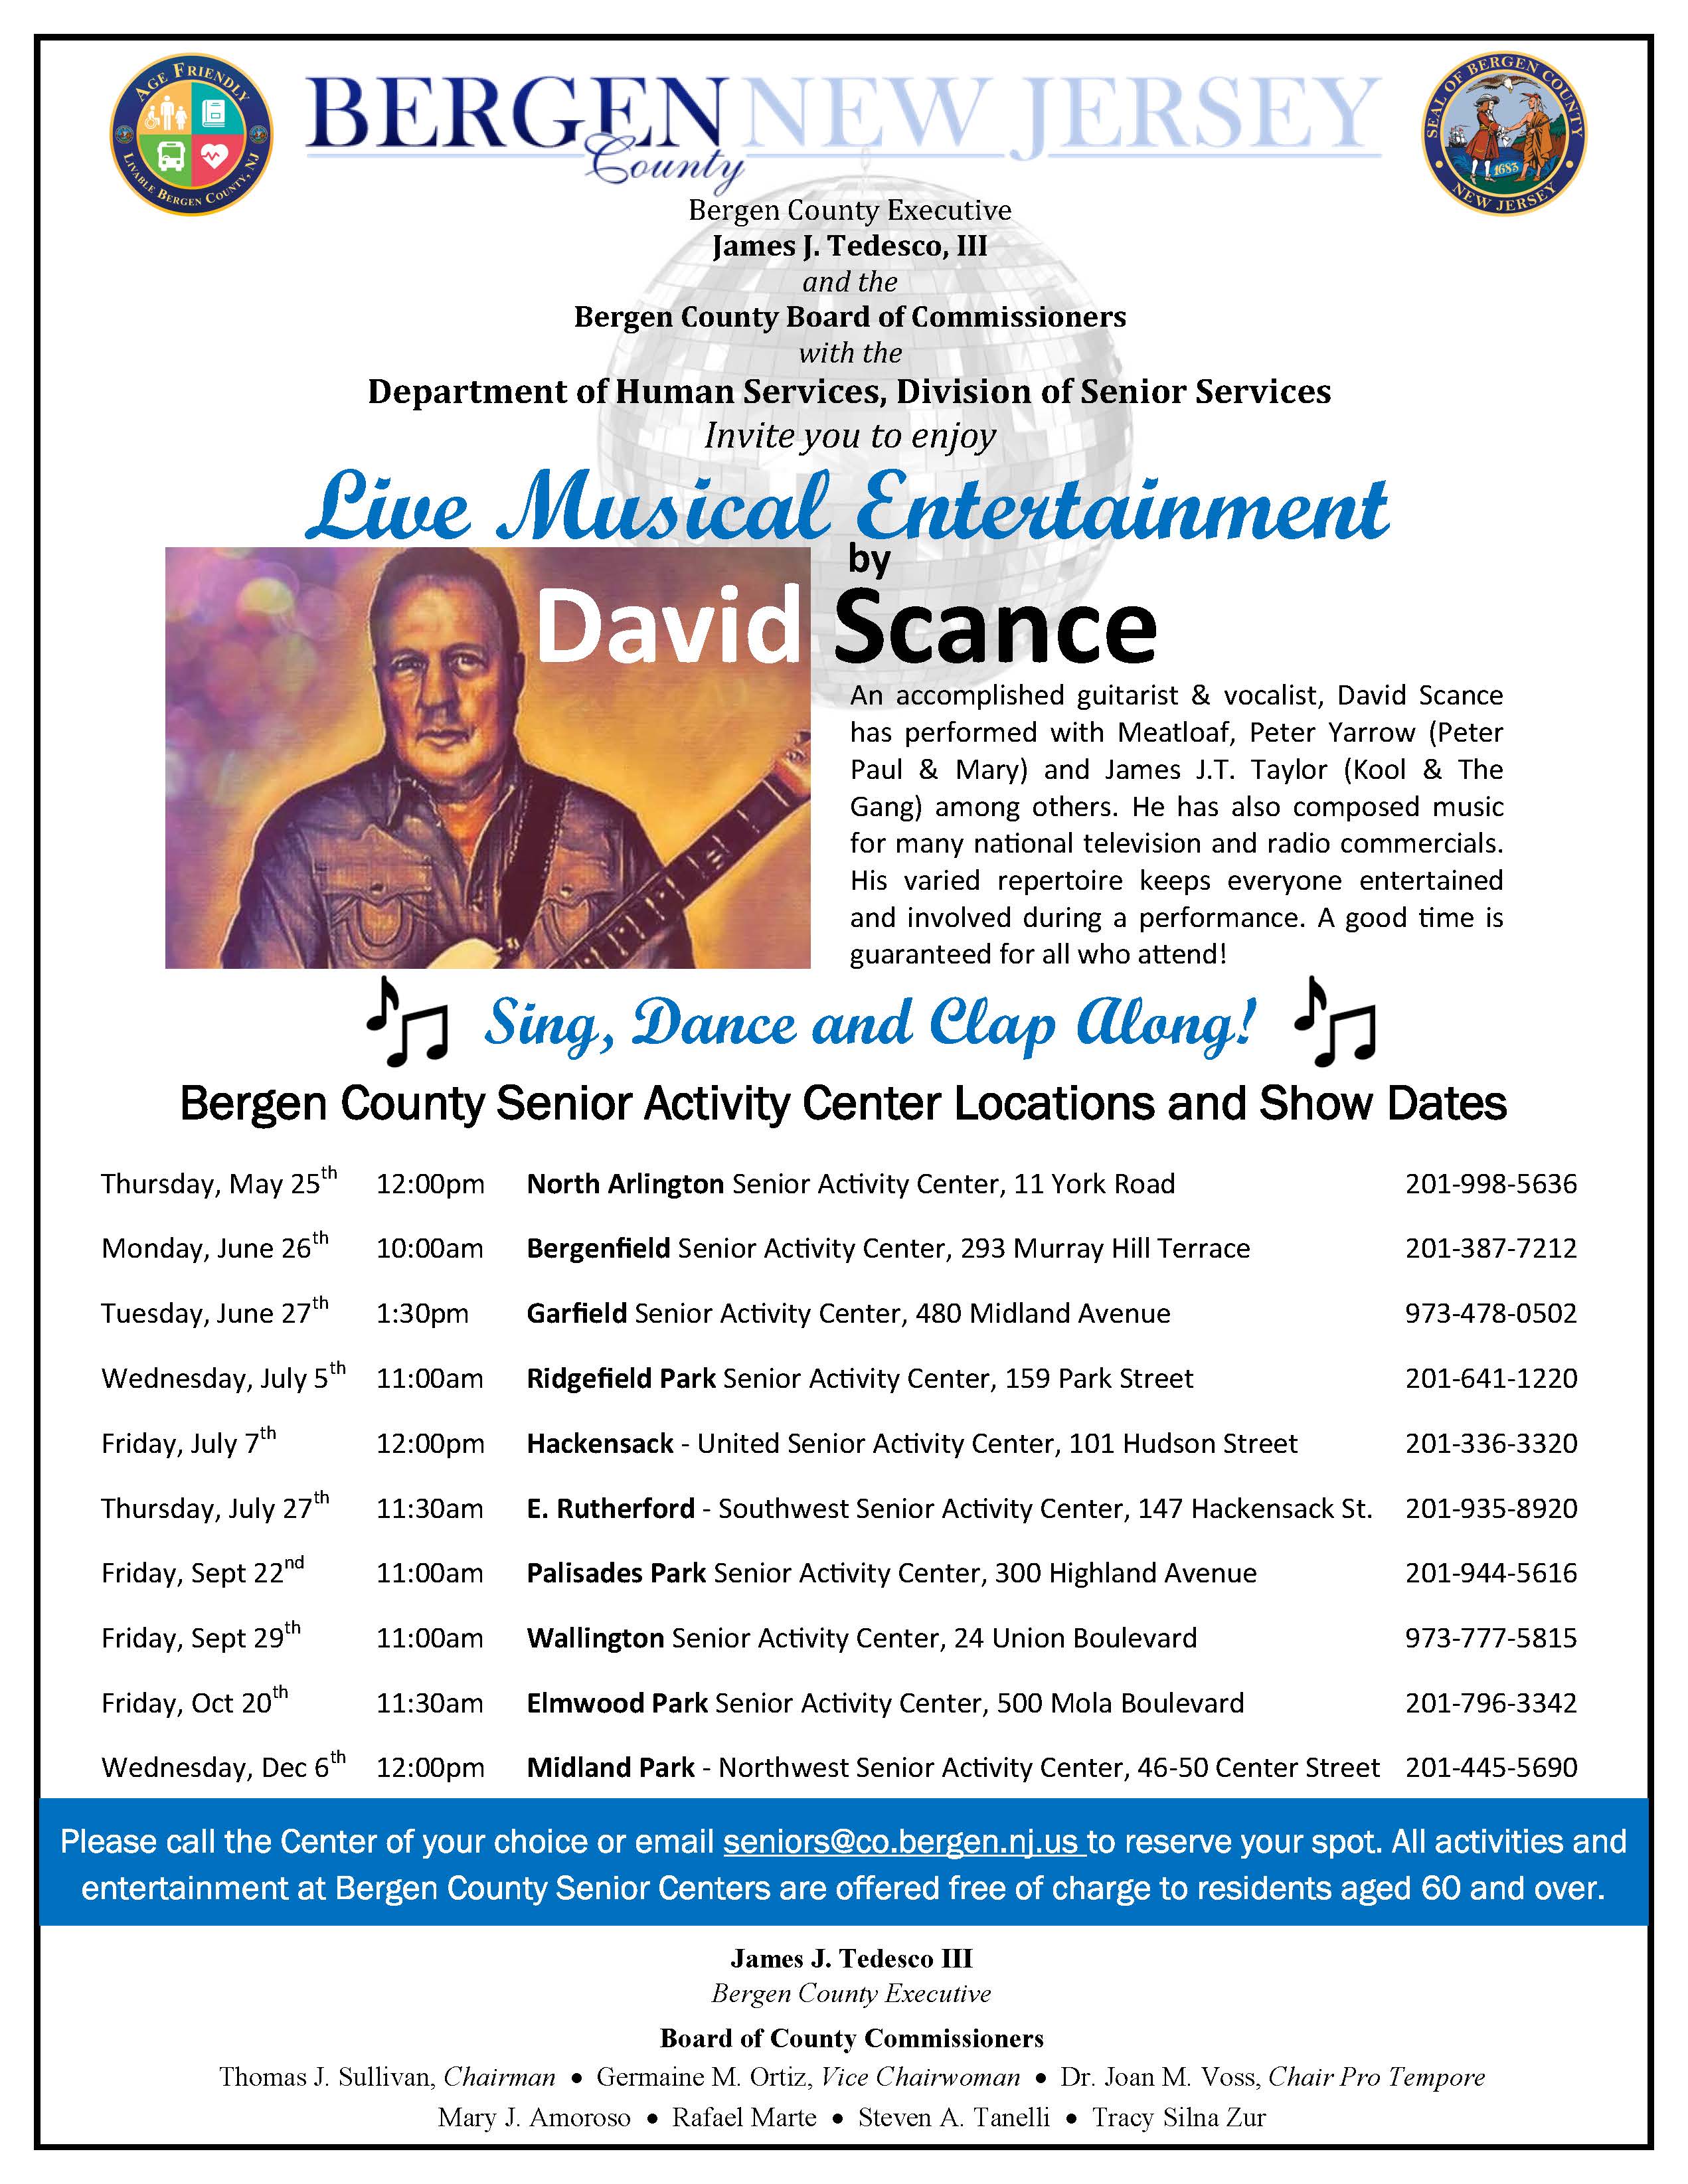 musical entertainment by david scance flyer